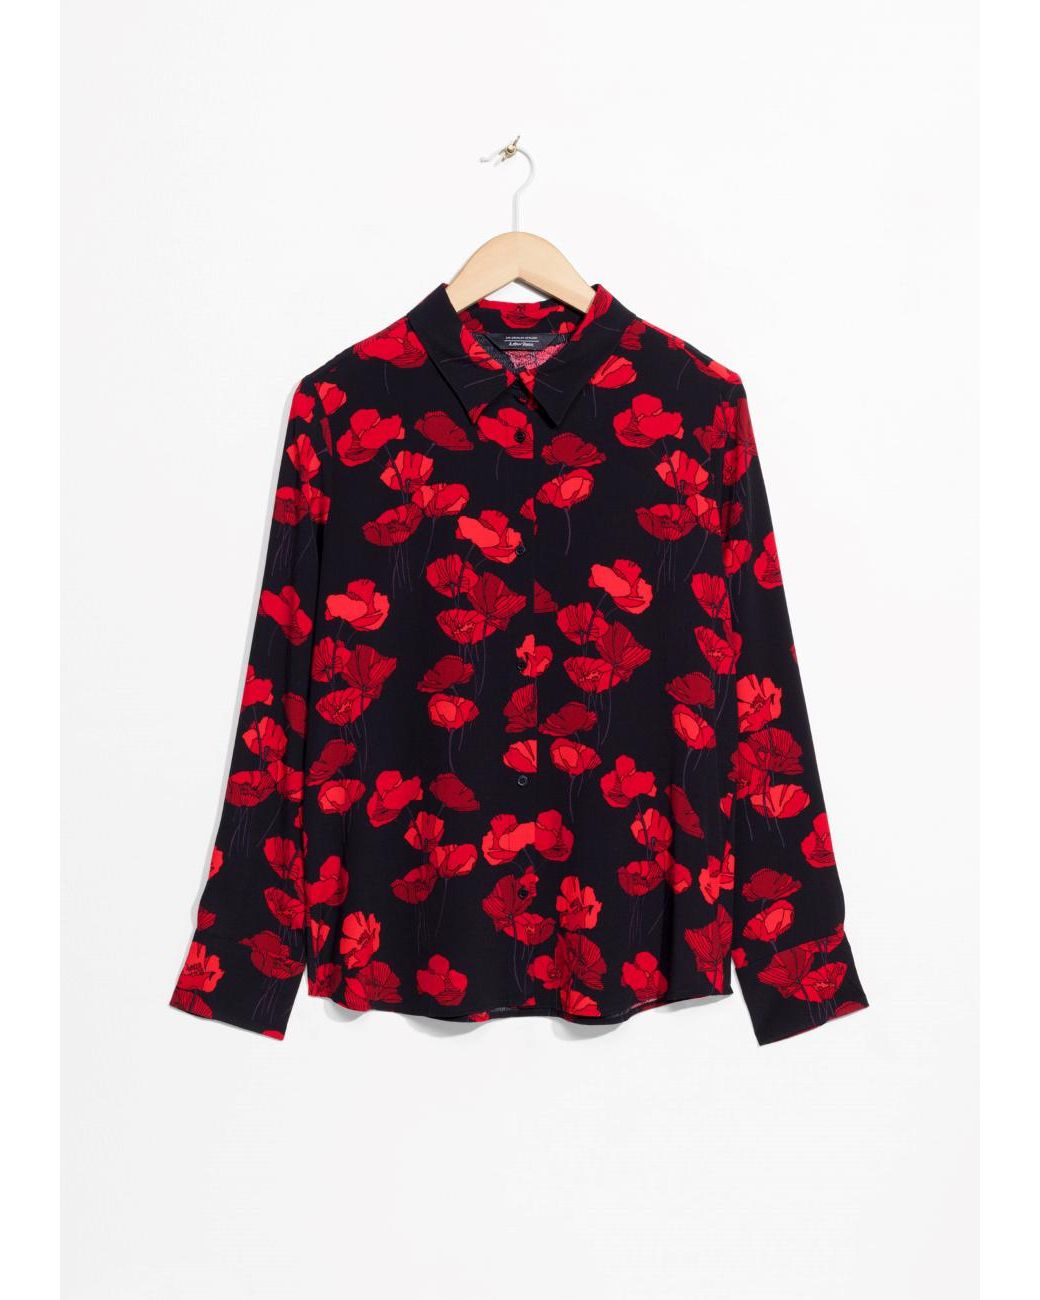 & Other Stories Poppy Print Blouse in Red | Lyst